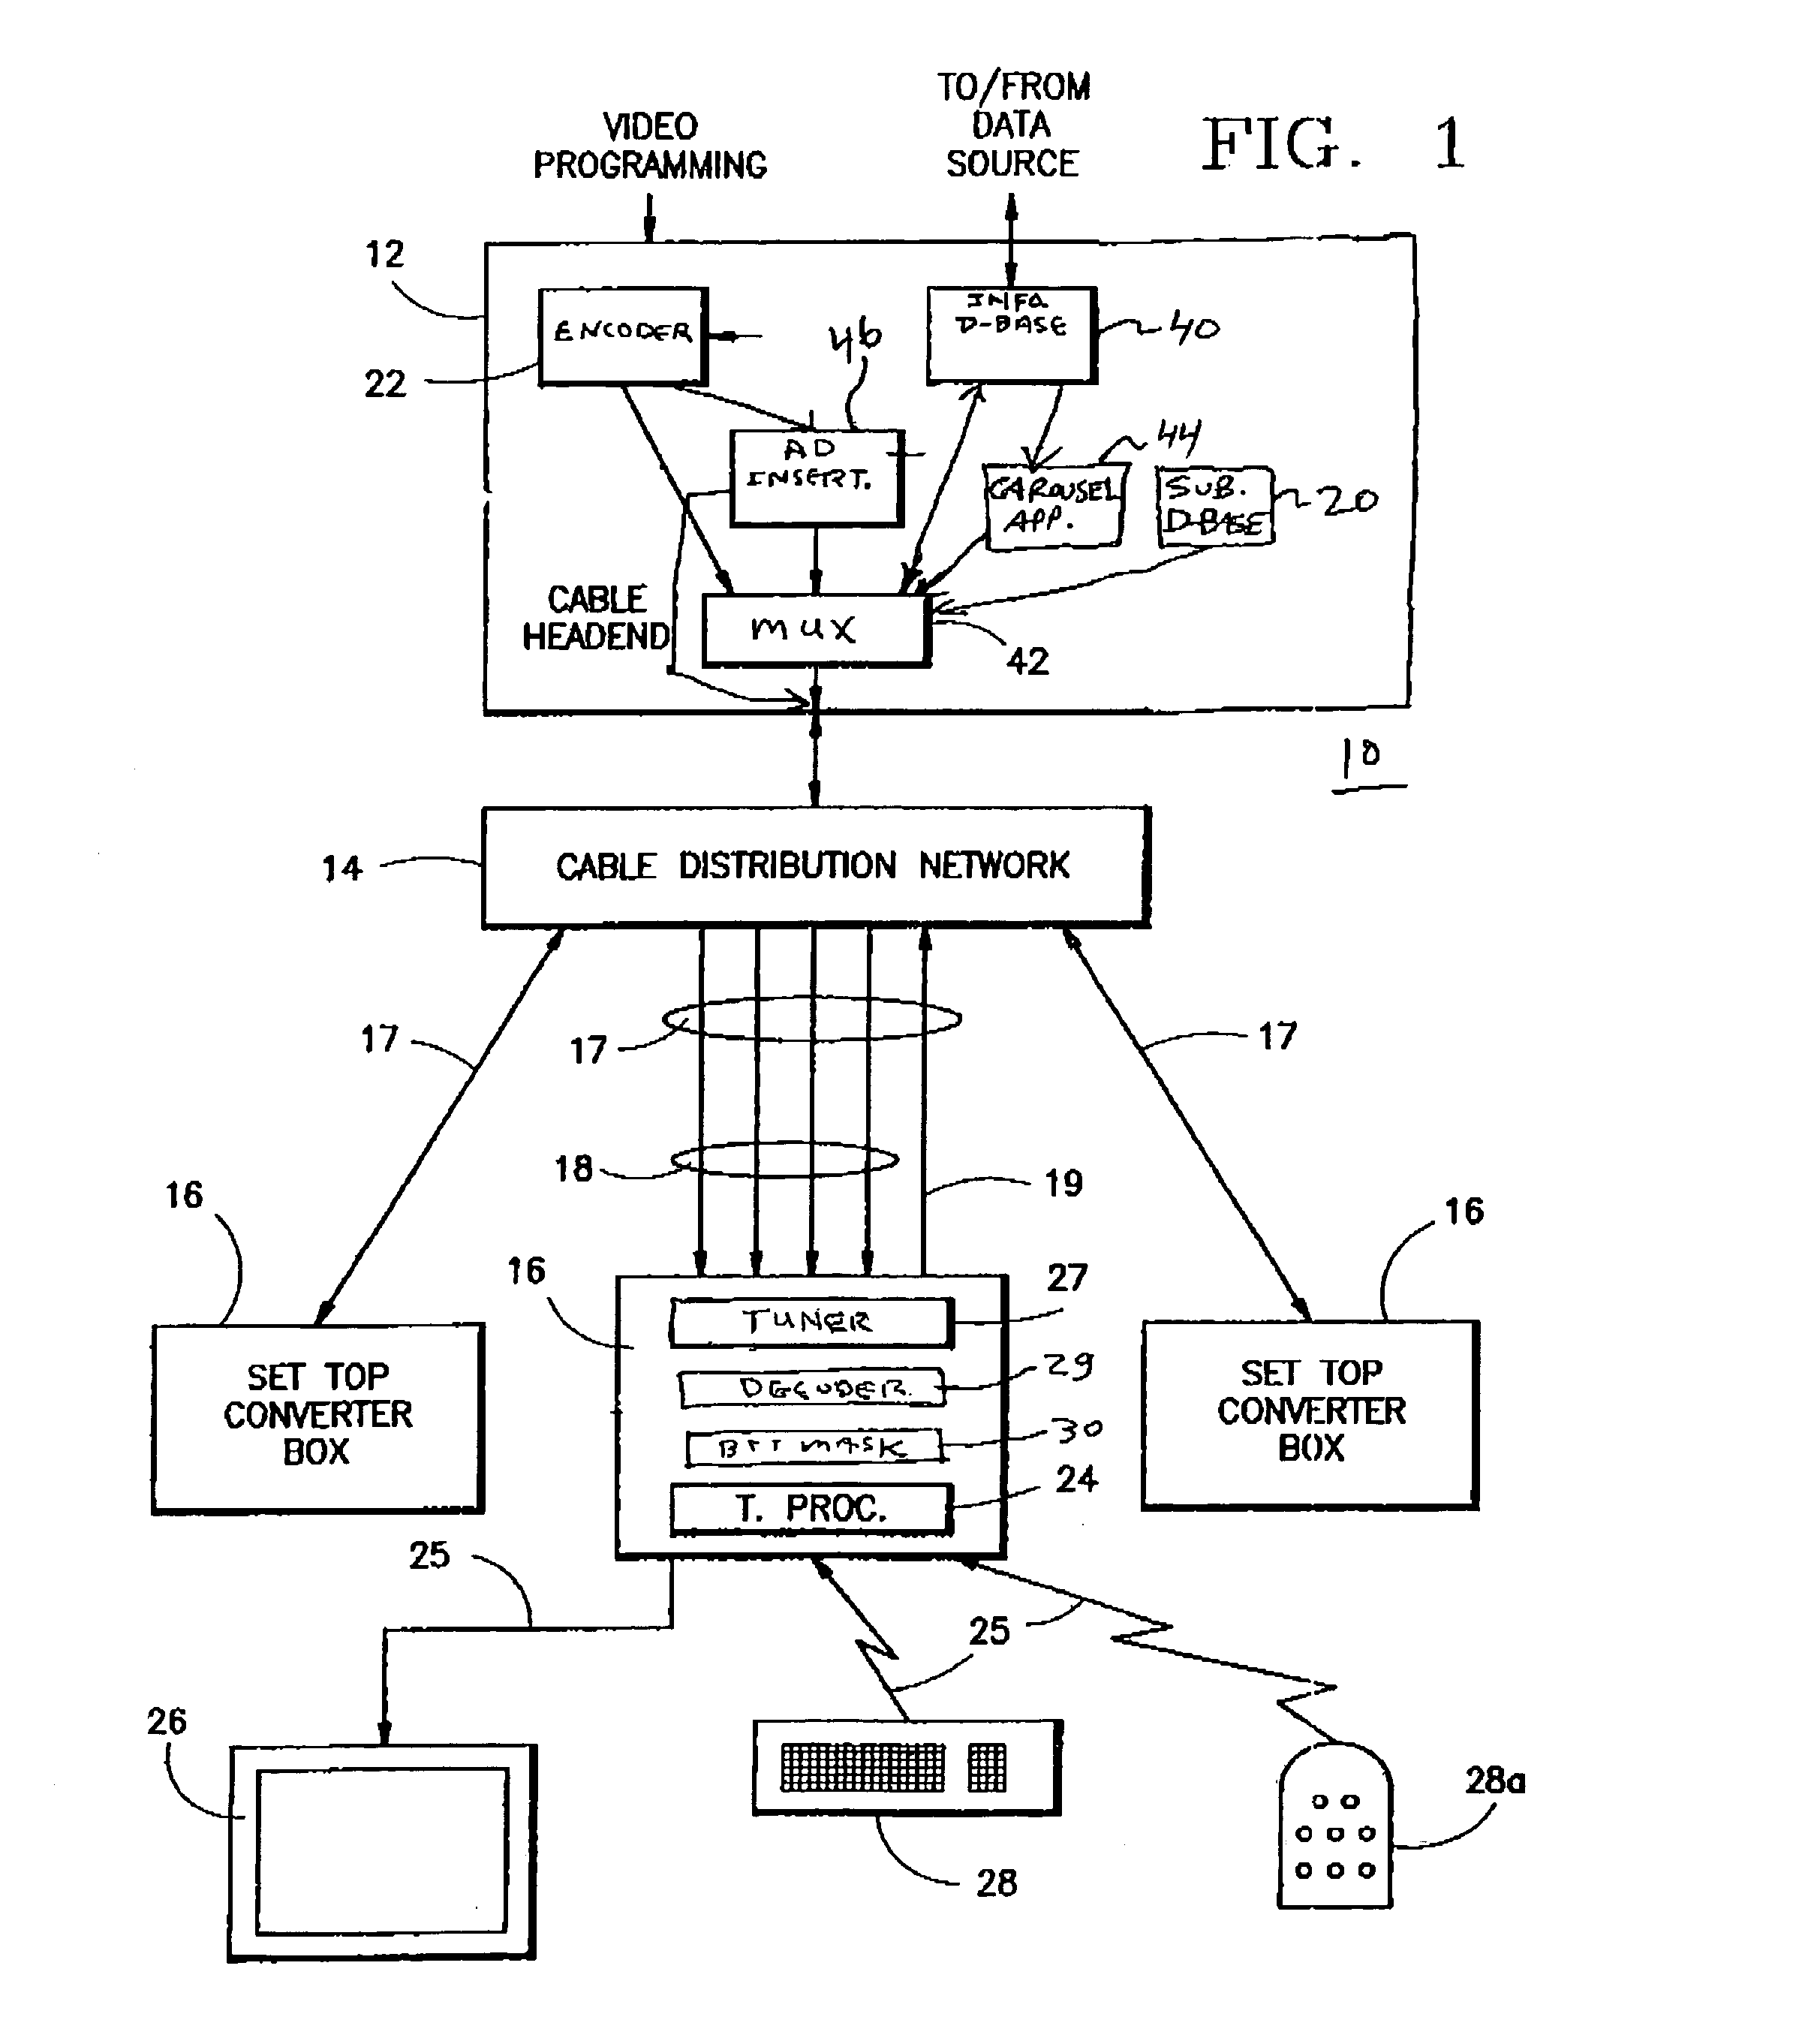 System and method for transmitting and displaying targeted infromation